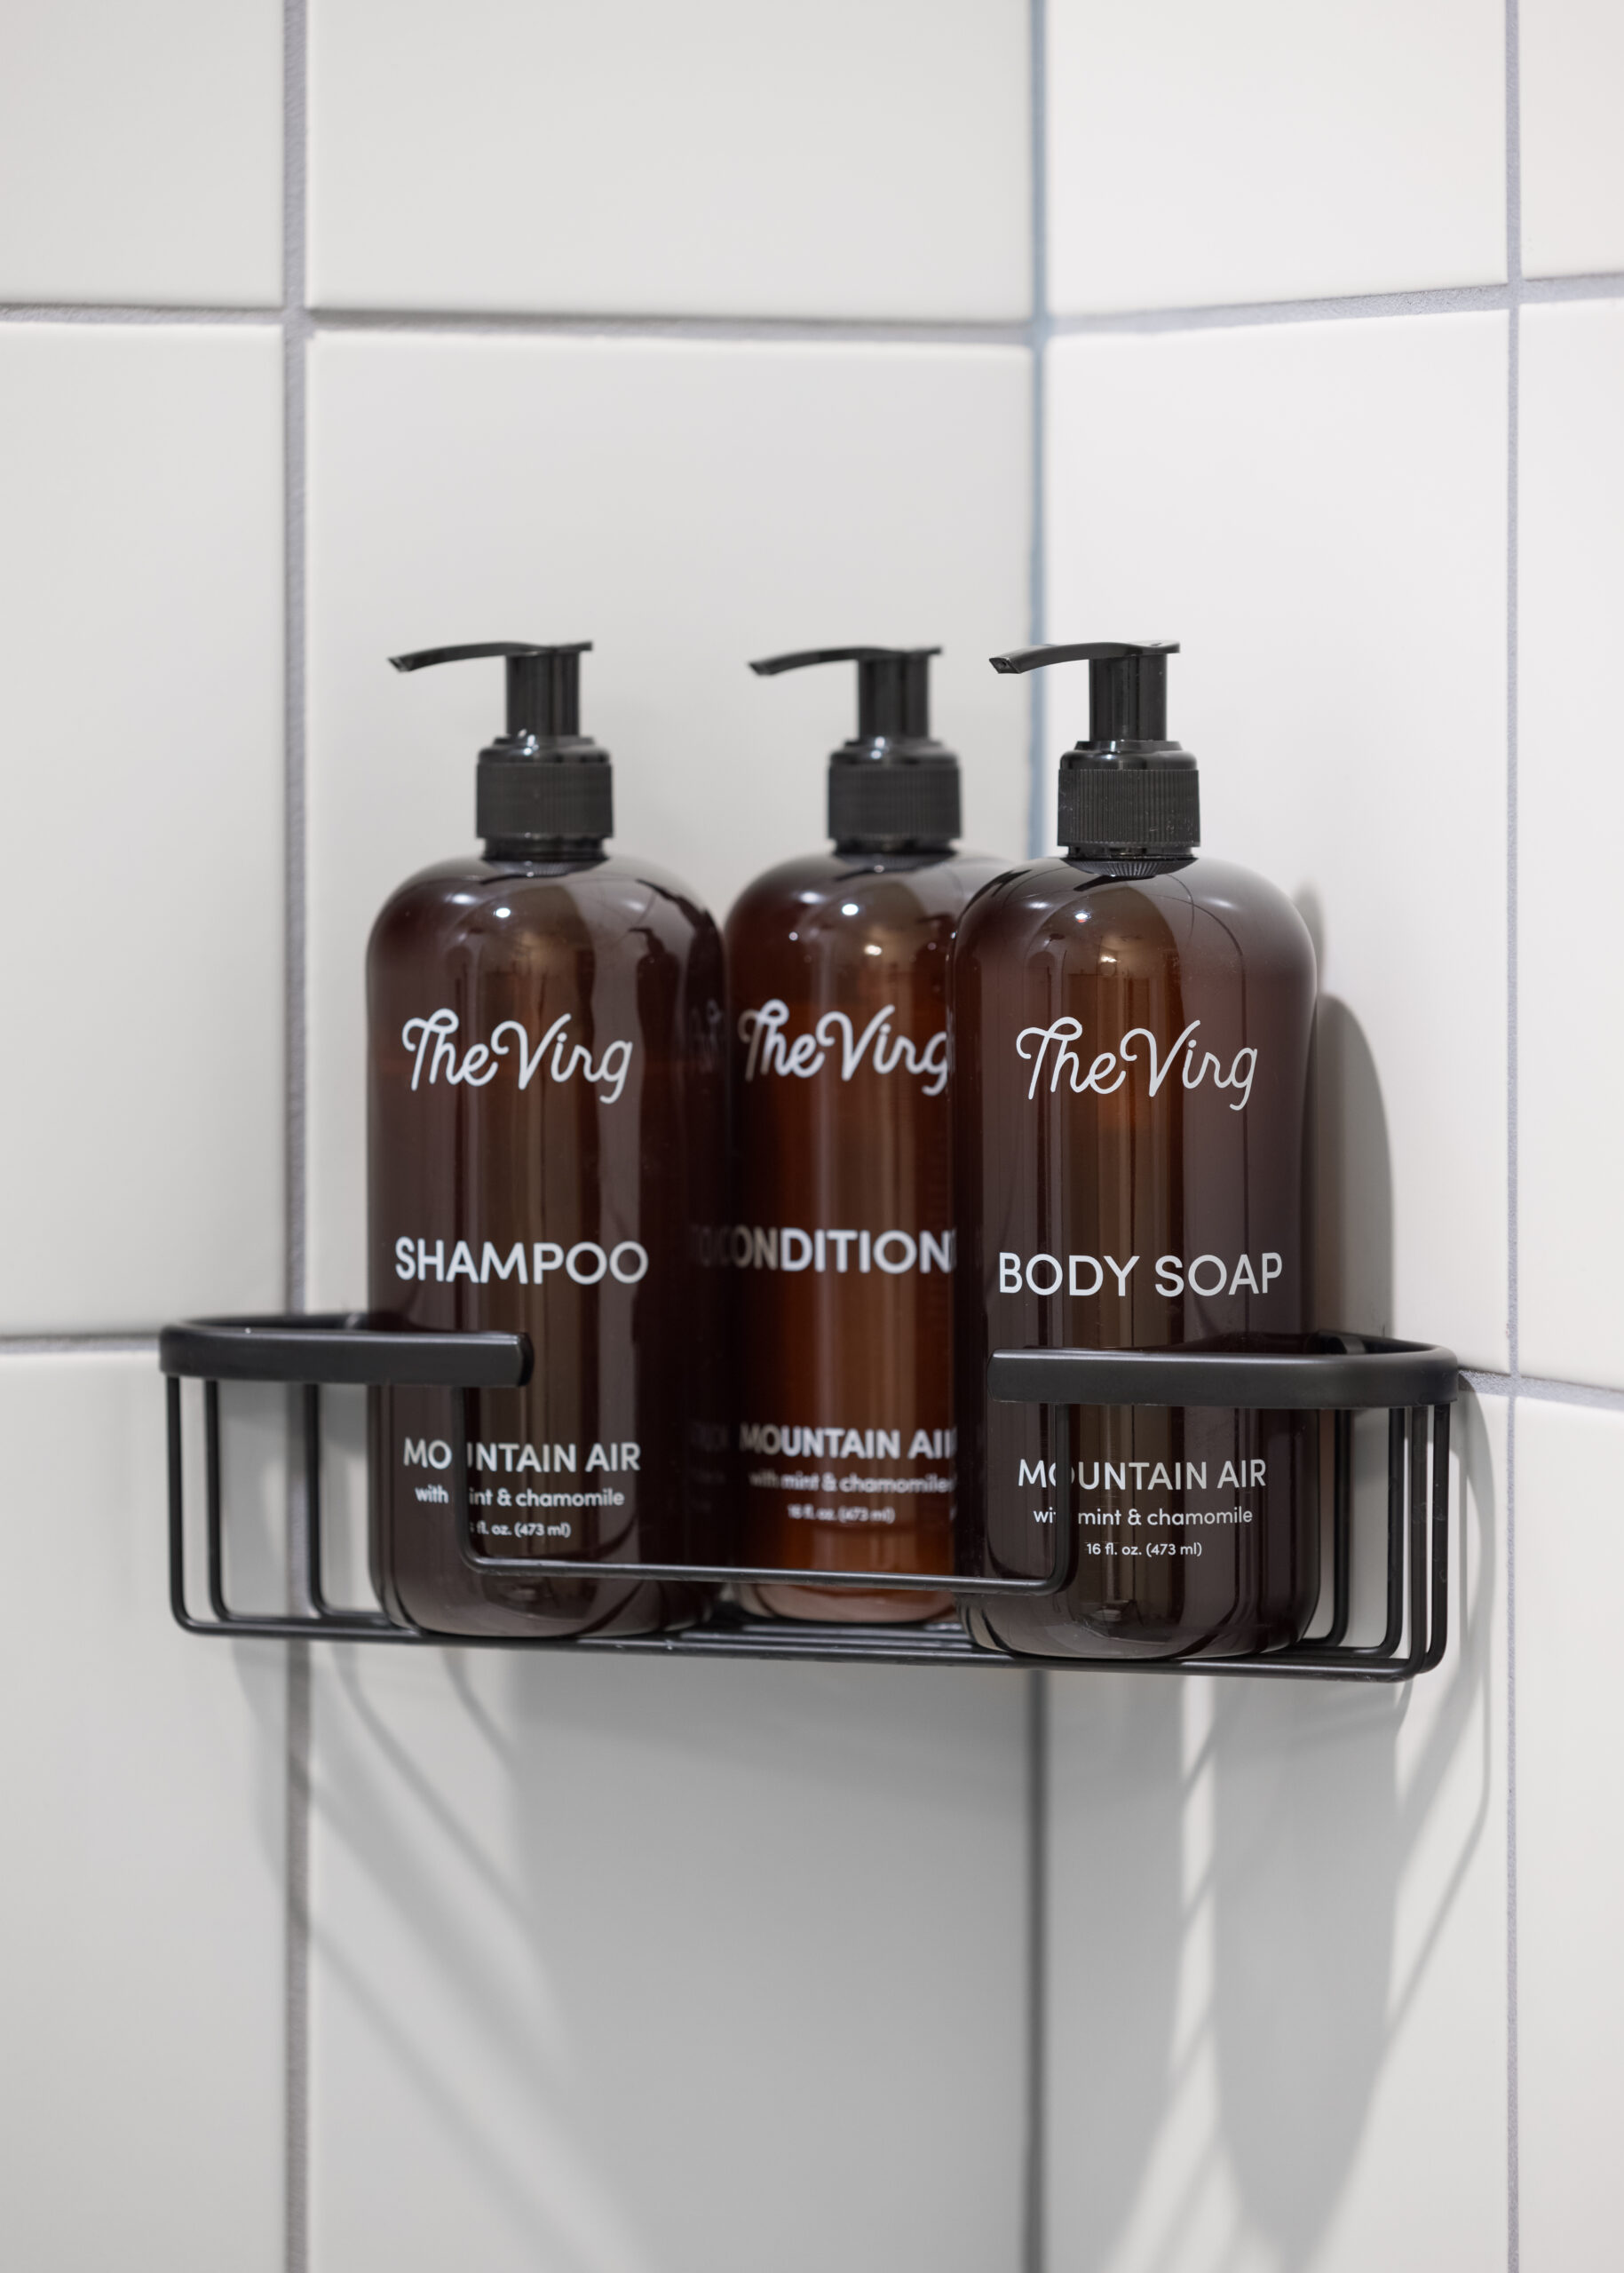 Organized arrangement on the rack with three neatly placed soap dispenser bottles.